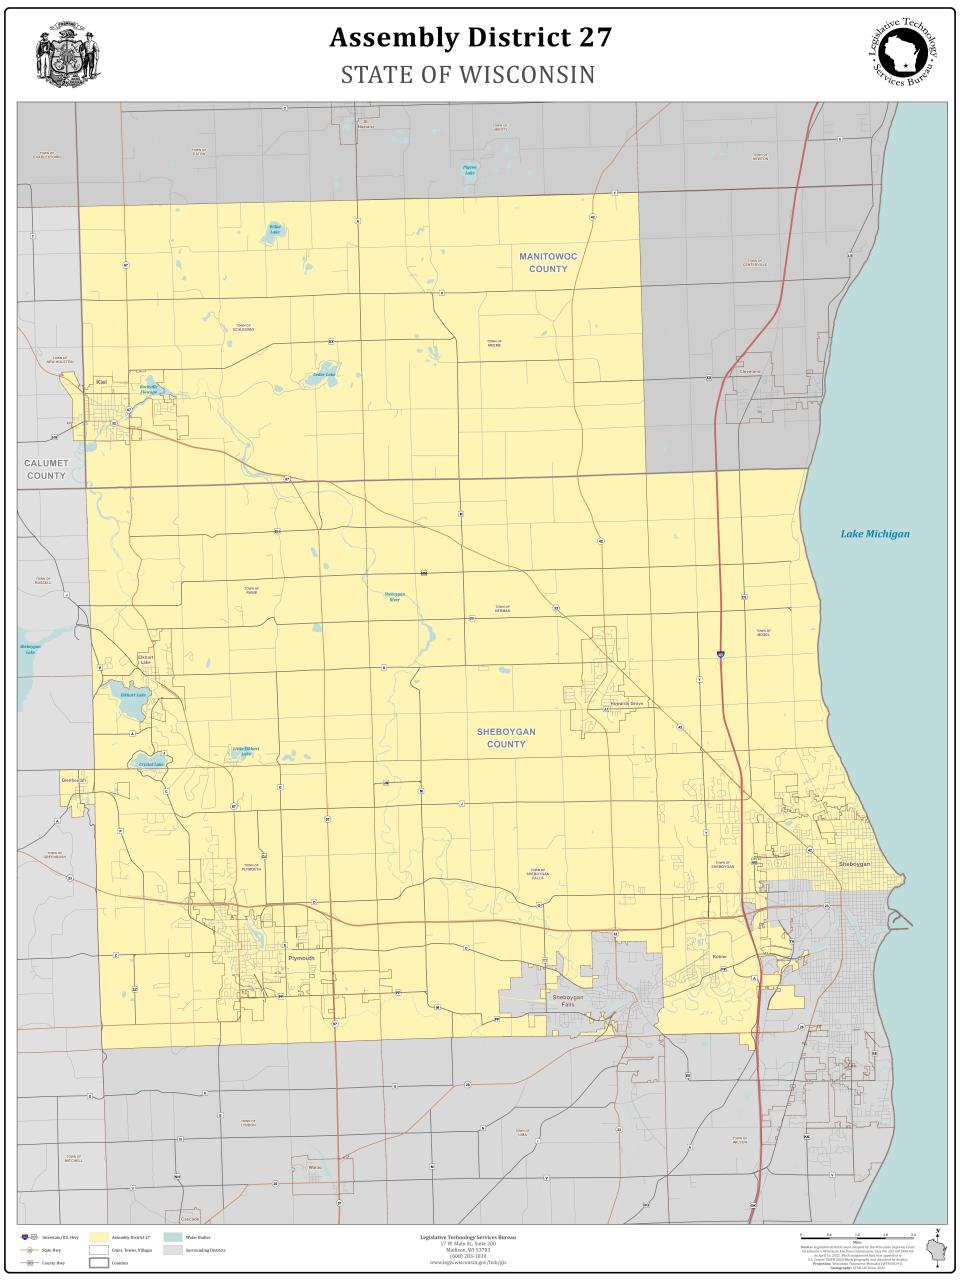 A map of Wisconsin Assembly District 27 (shaded in yellow). The District includes part of the City of Sheboygan, the Town of Sheboygan, Plymouth, the Town of Sheboygan Falls, Kohler, Howards Grove, Elkhart Lake, Mosel, Herman, Glenbeulah, Rhine and southern Manitowoc County including Kiel.